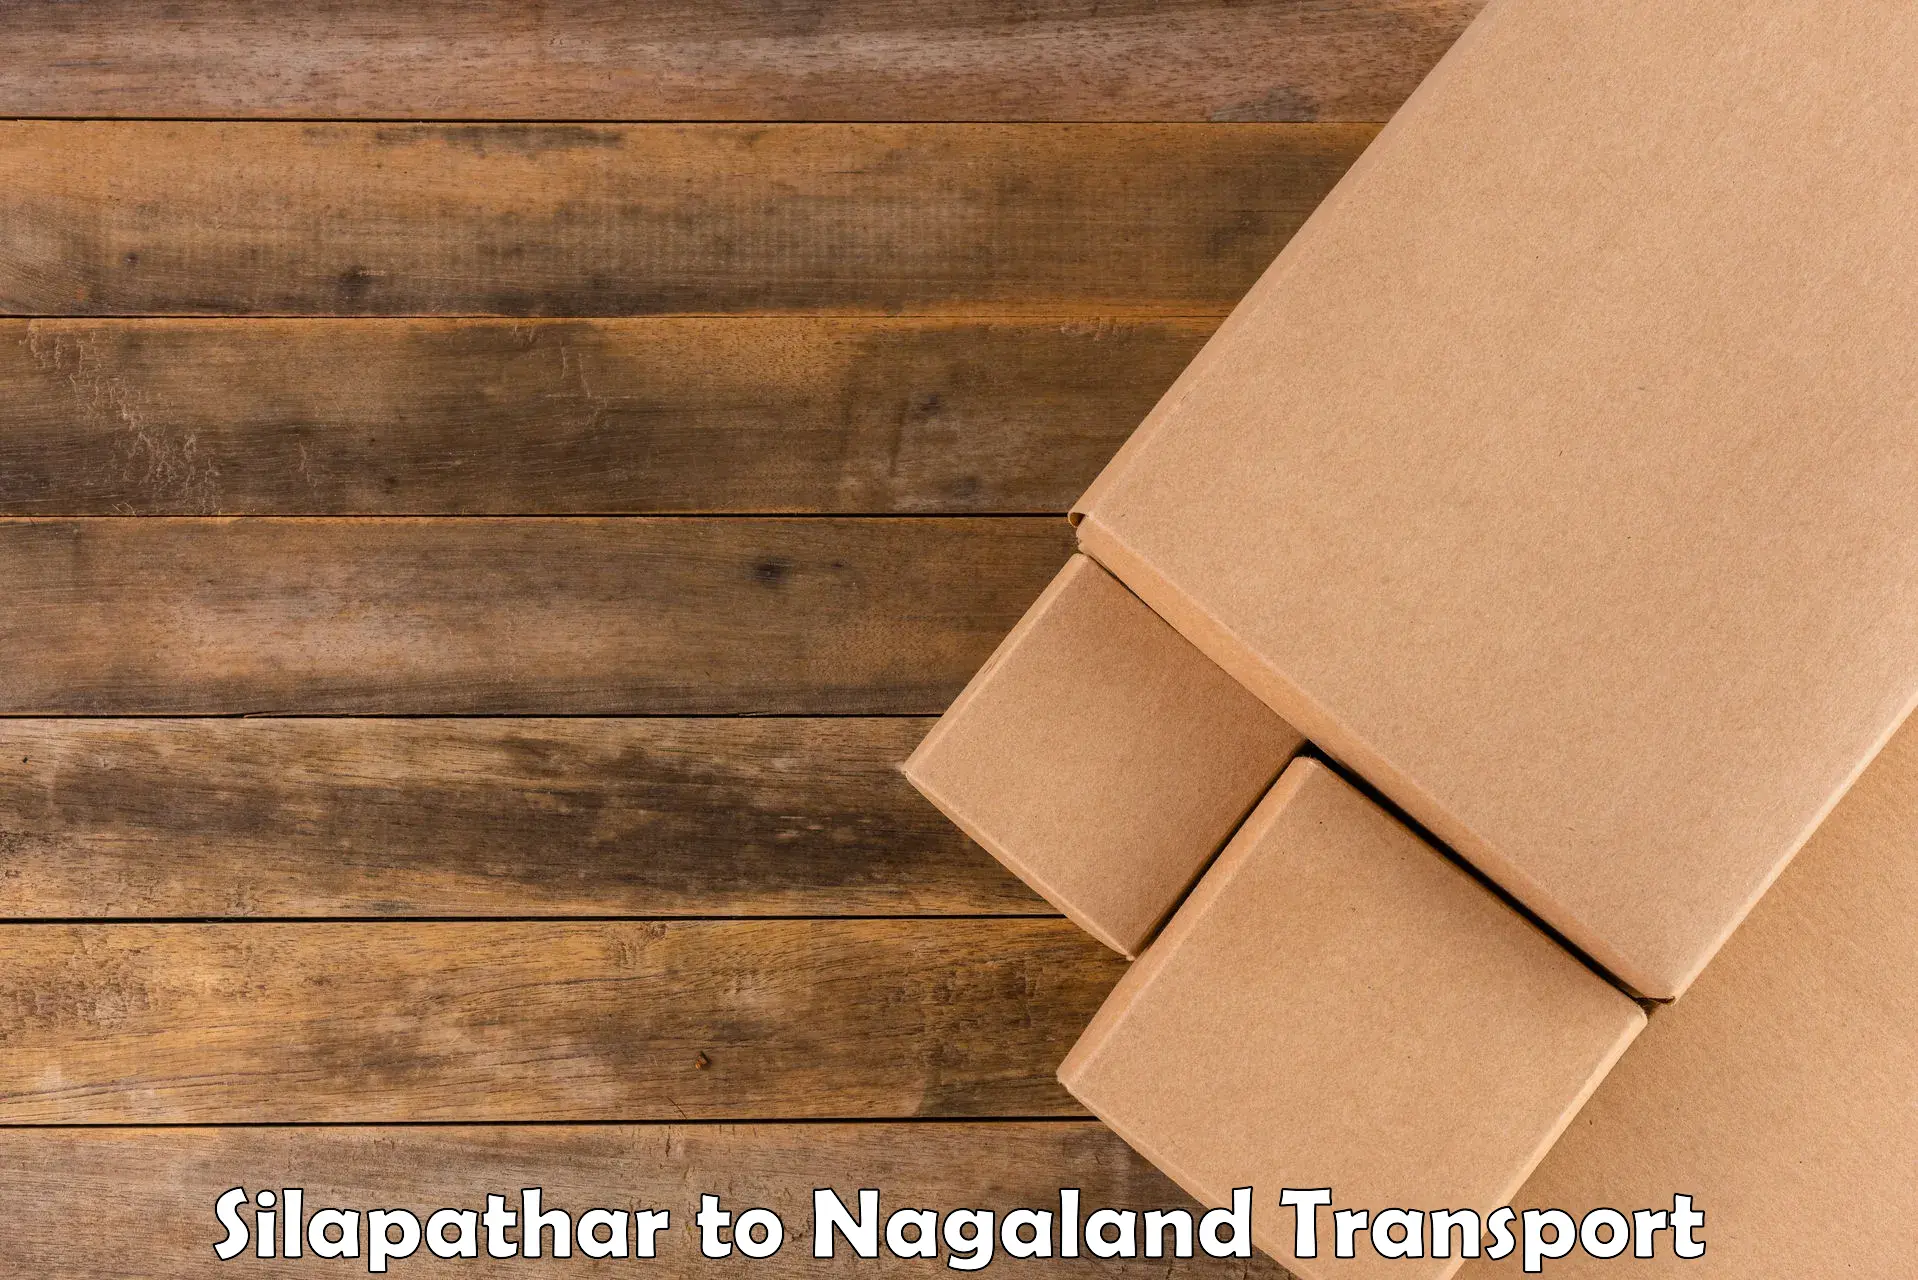 Goods delivery service Silapathar to Nagaland